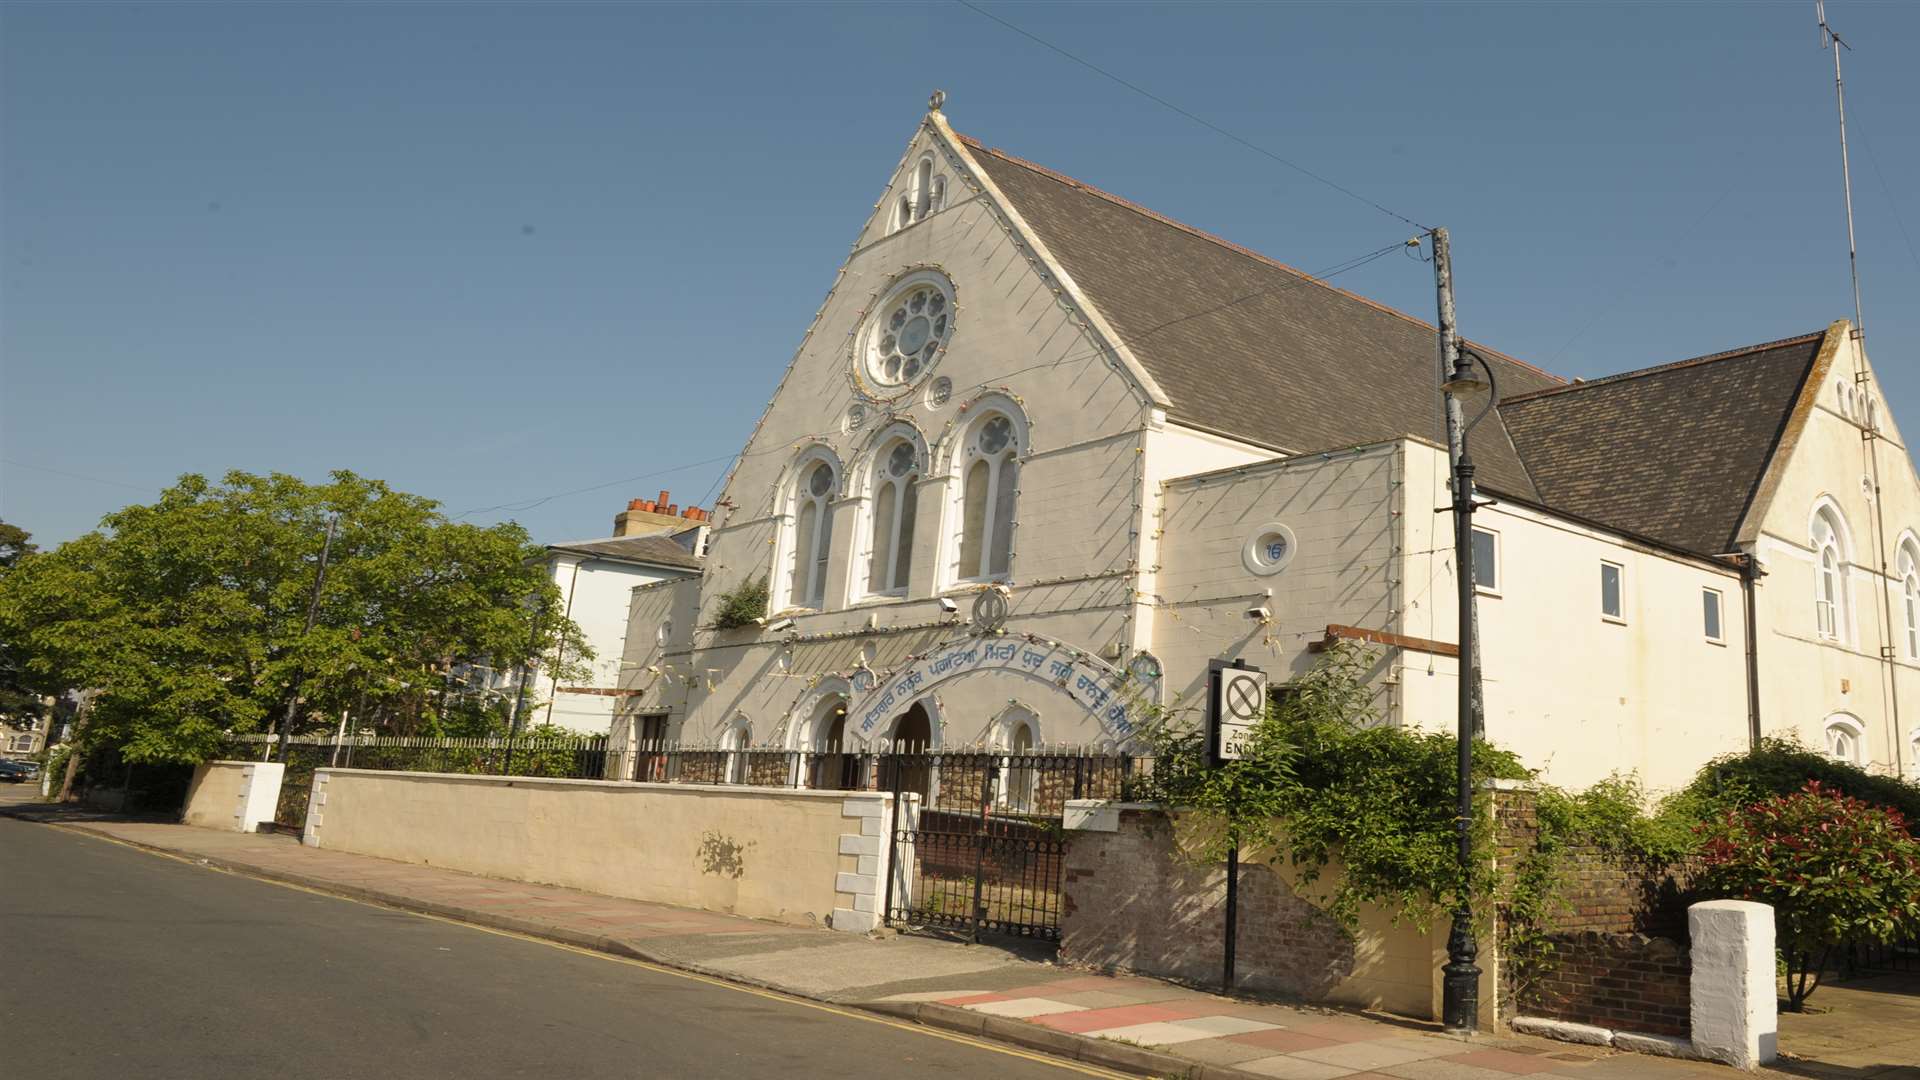 The former temple in Clarence Place, Gravesend.